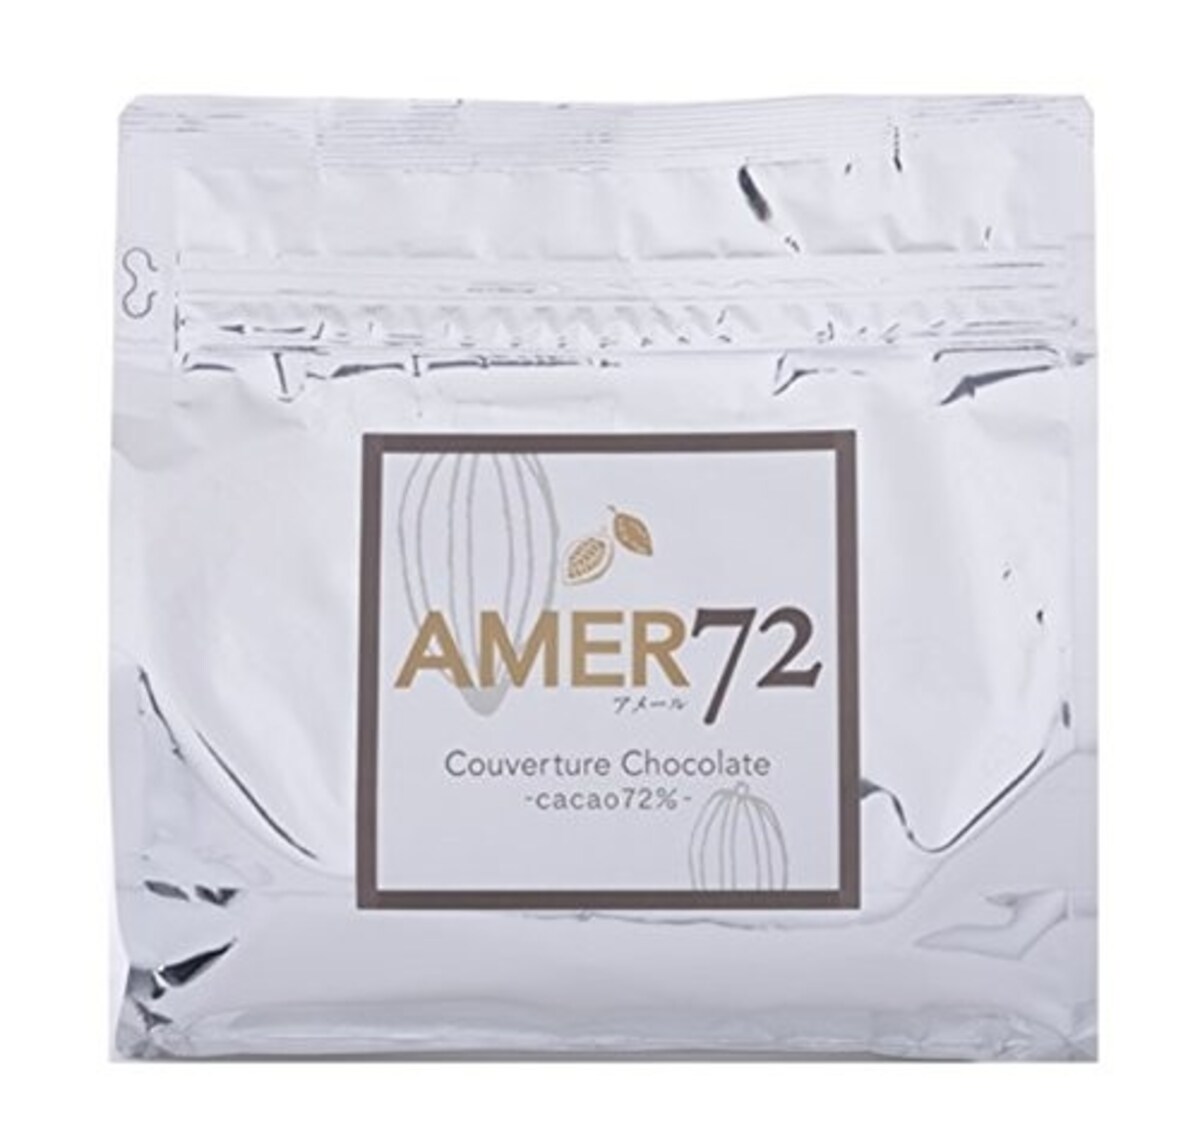 AMER72 Couverture Chocolate